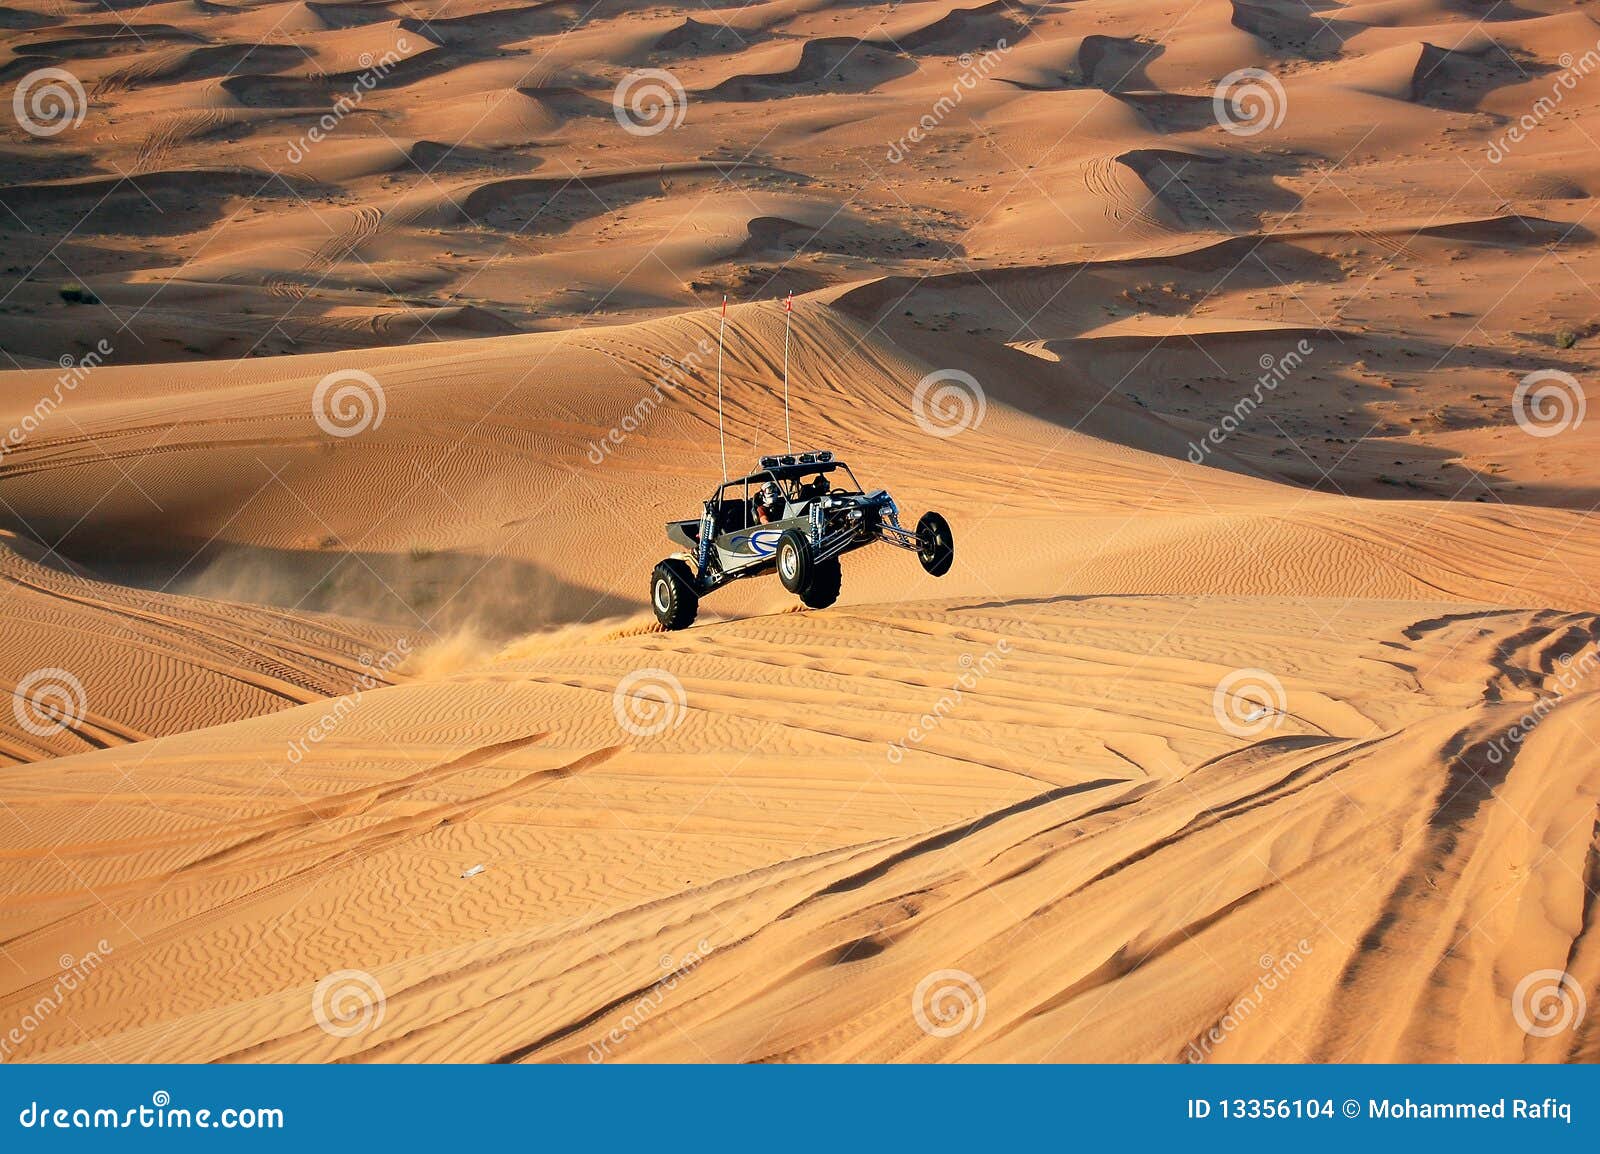 dune bashing with a dune buggy